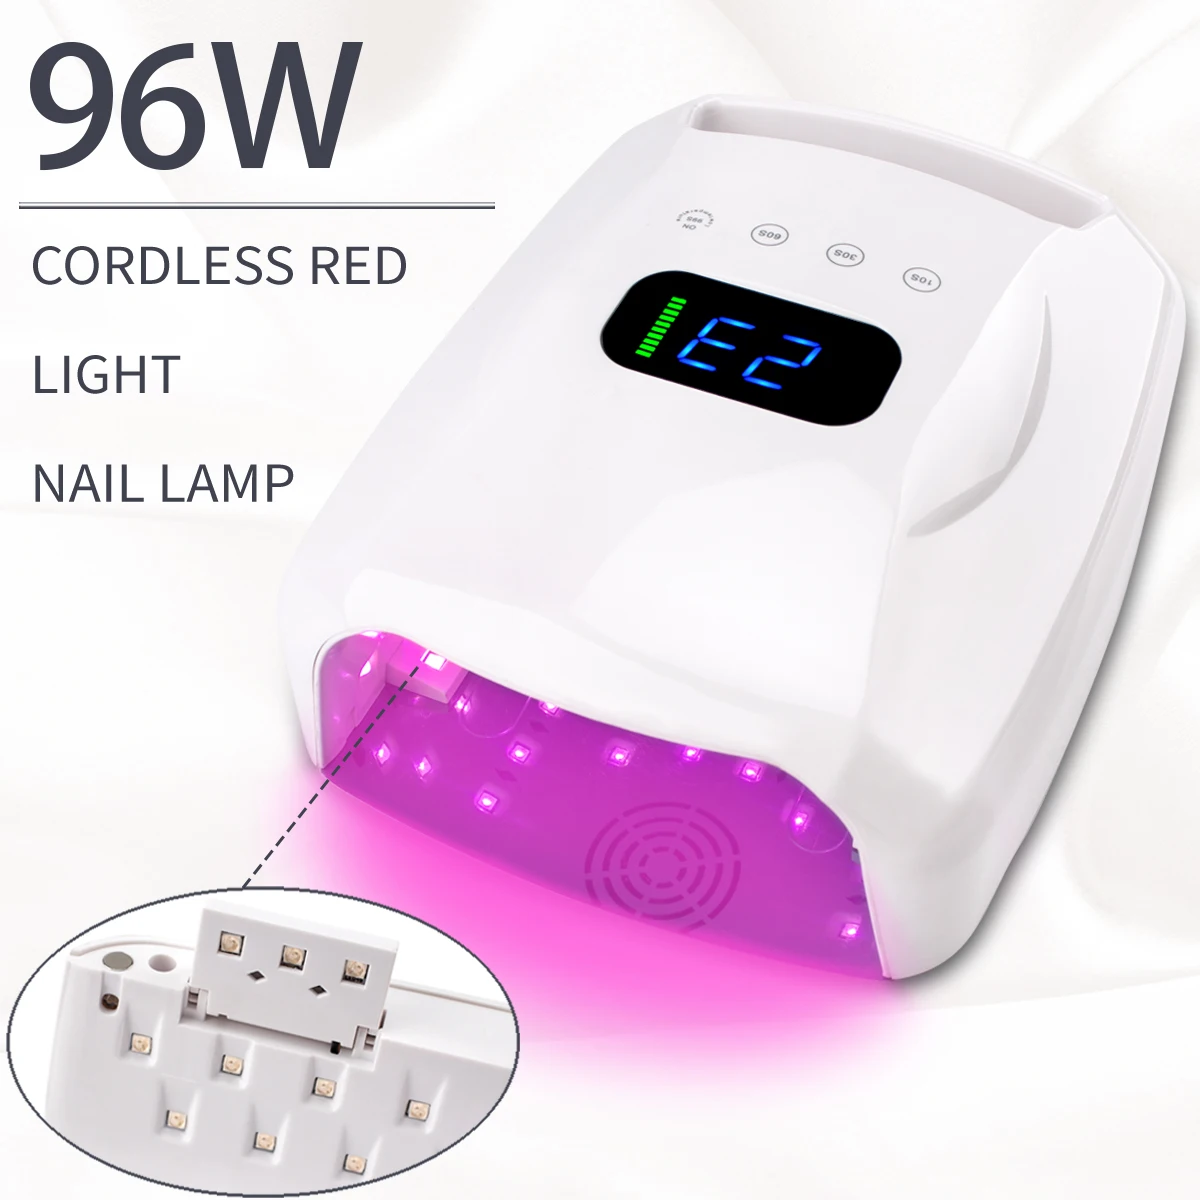 Cordless RED Light Cordless 96W LED UV Nail Lamp For Curing Gel Polish Wireless with Large Lithium Battery High Power 96W